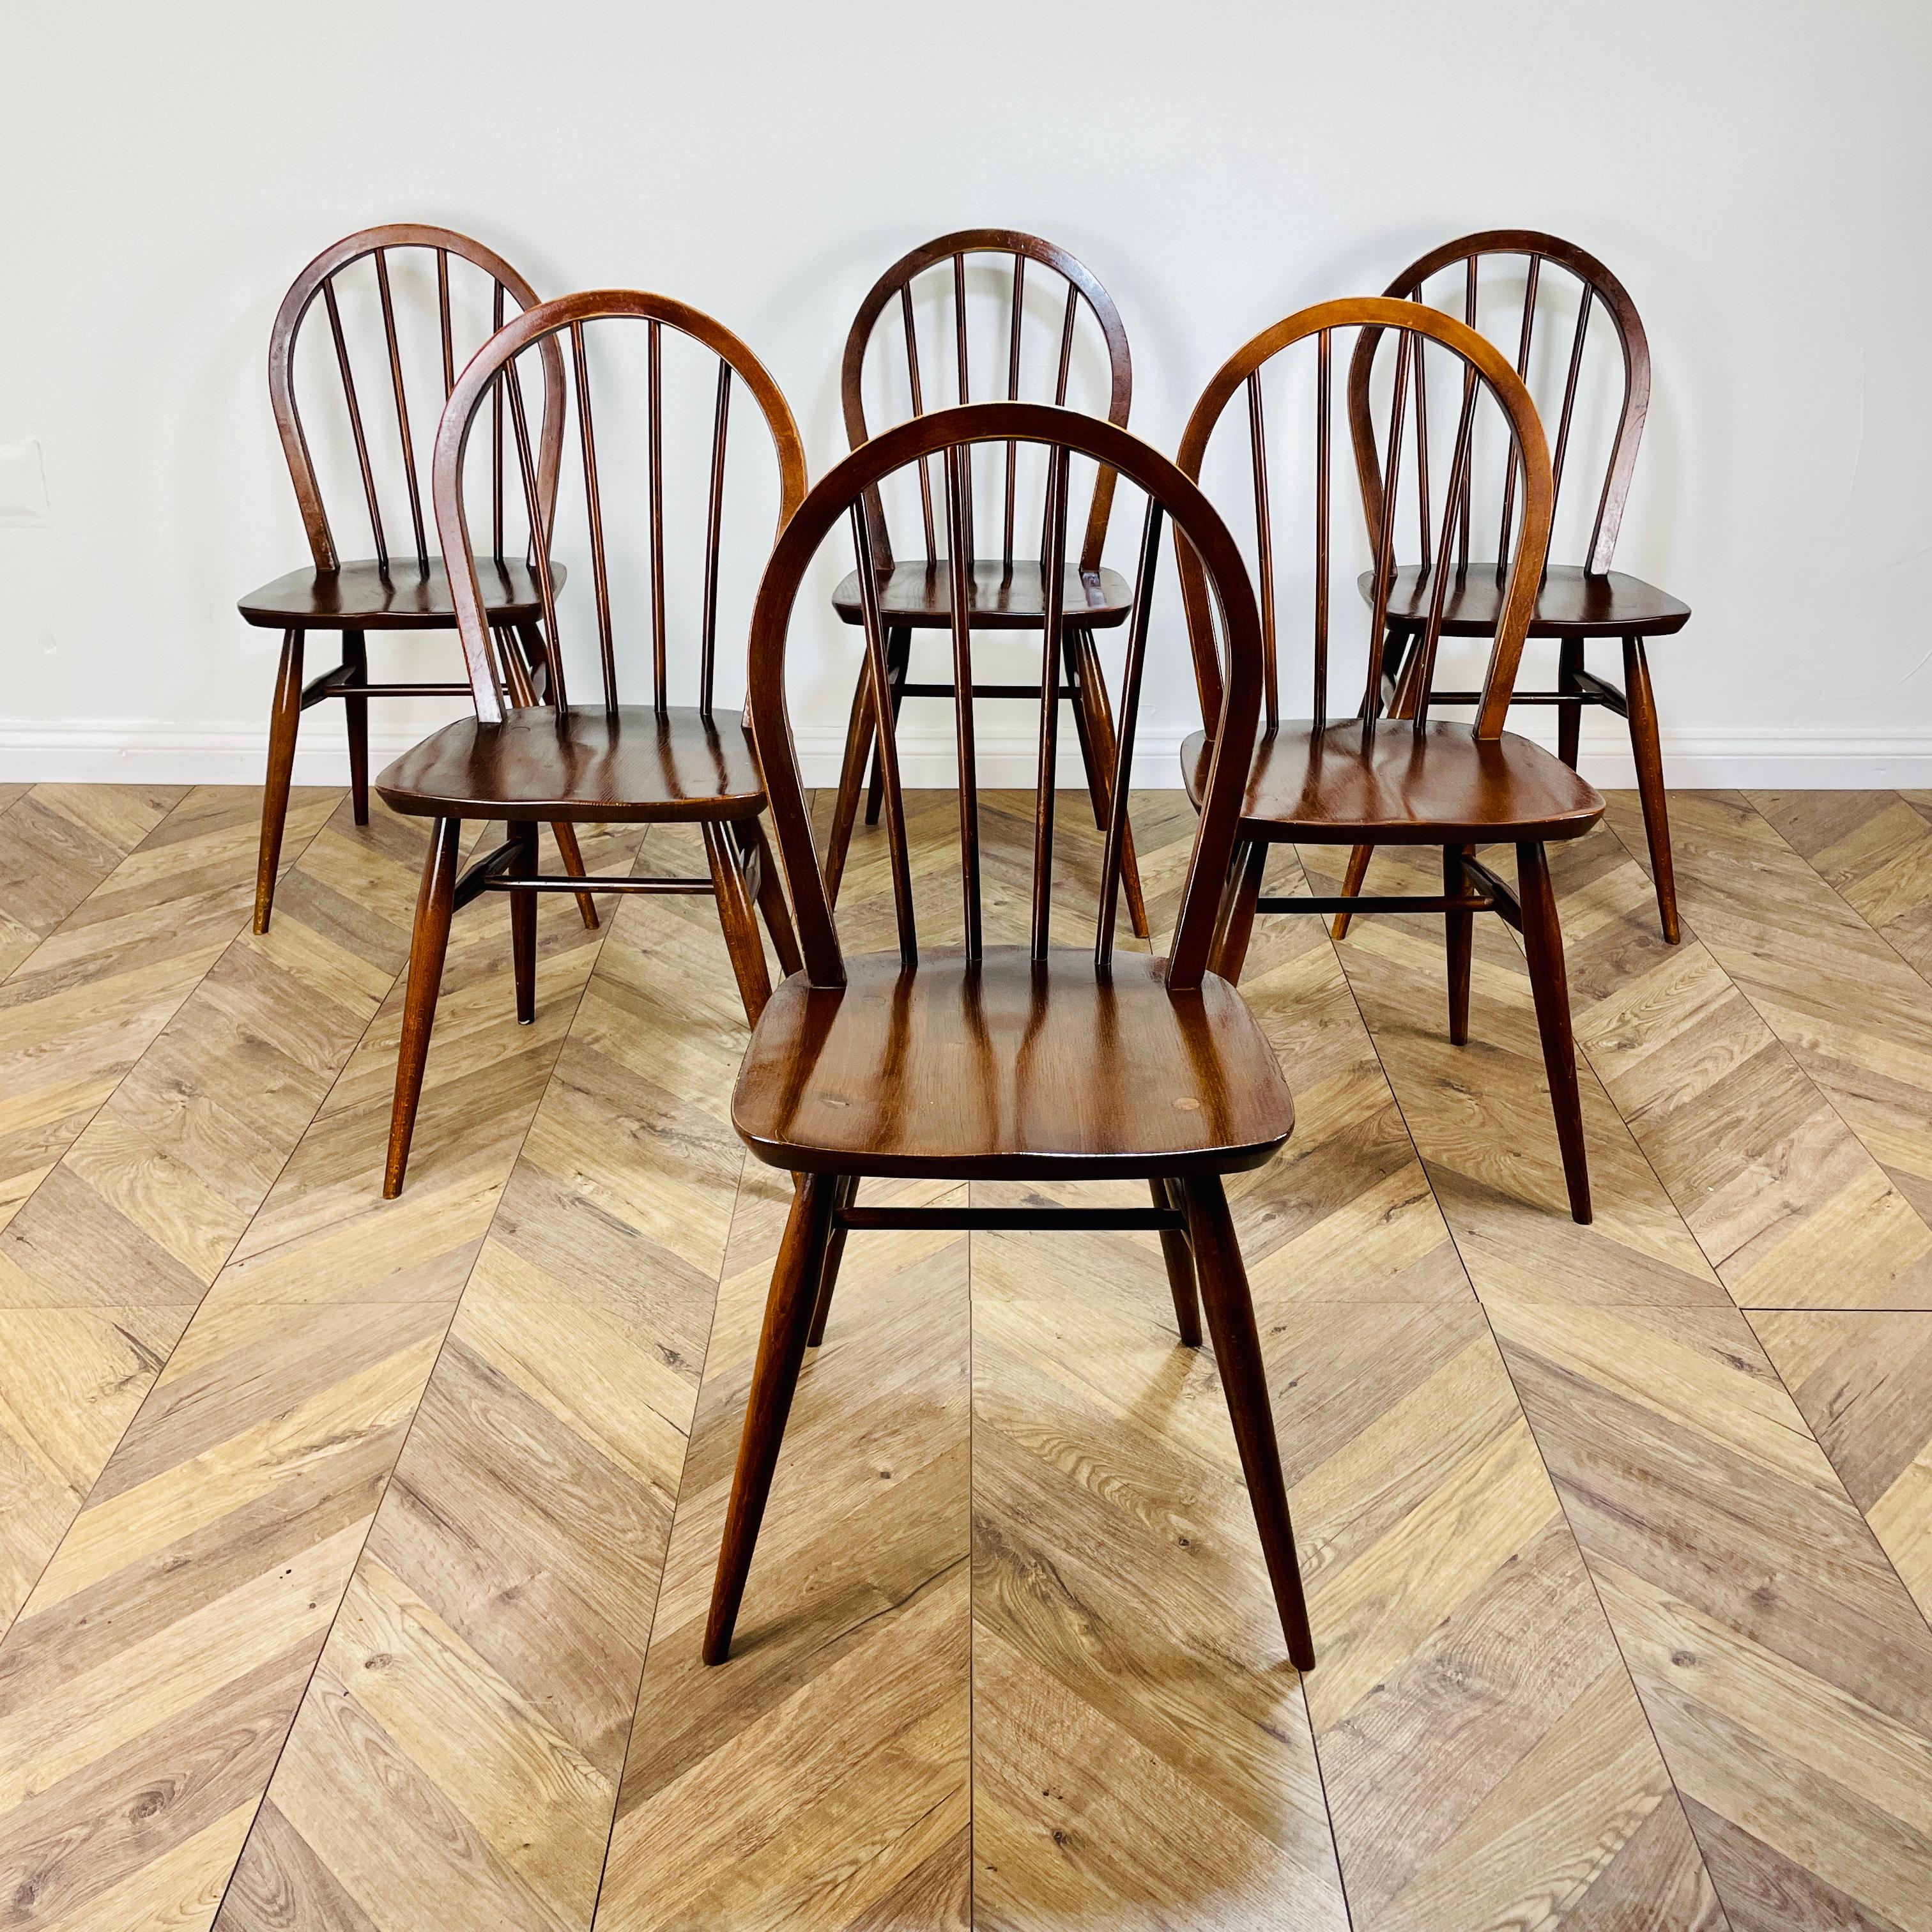 Set of 6, Ercol Windsor Model 400 Hoop-Back Chairs, 1950s.

Designed by Lucian Ercolani, the chairs seamlessly blend contemporary British design and traditional craftsmanship.

The chairs are made from solid beech with elm seats and boast a